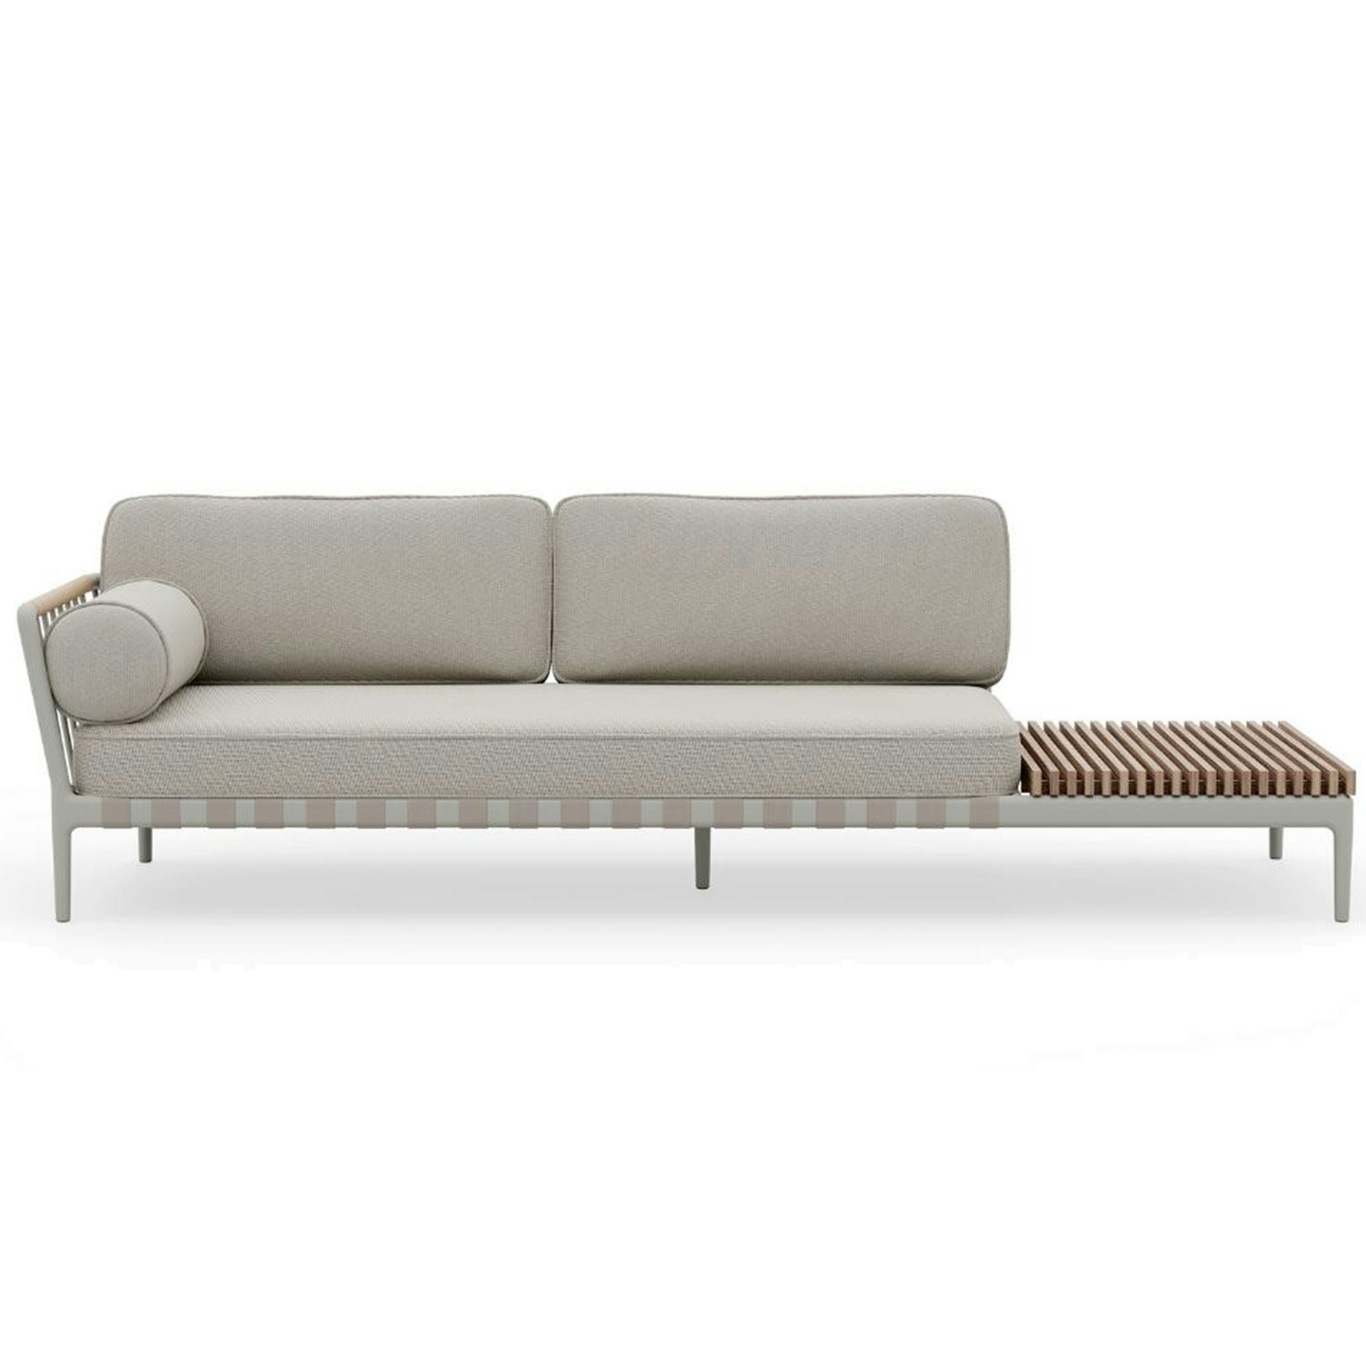 Vipp720 Open-Air Couch Open End Right, Beige